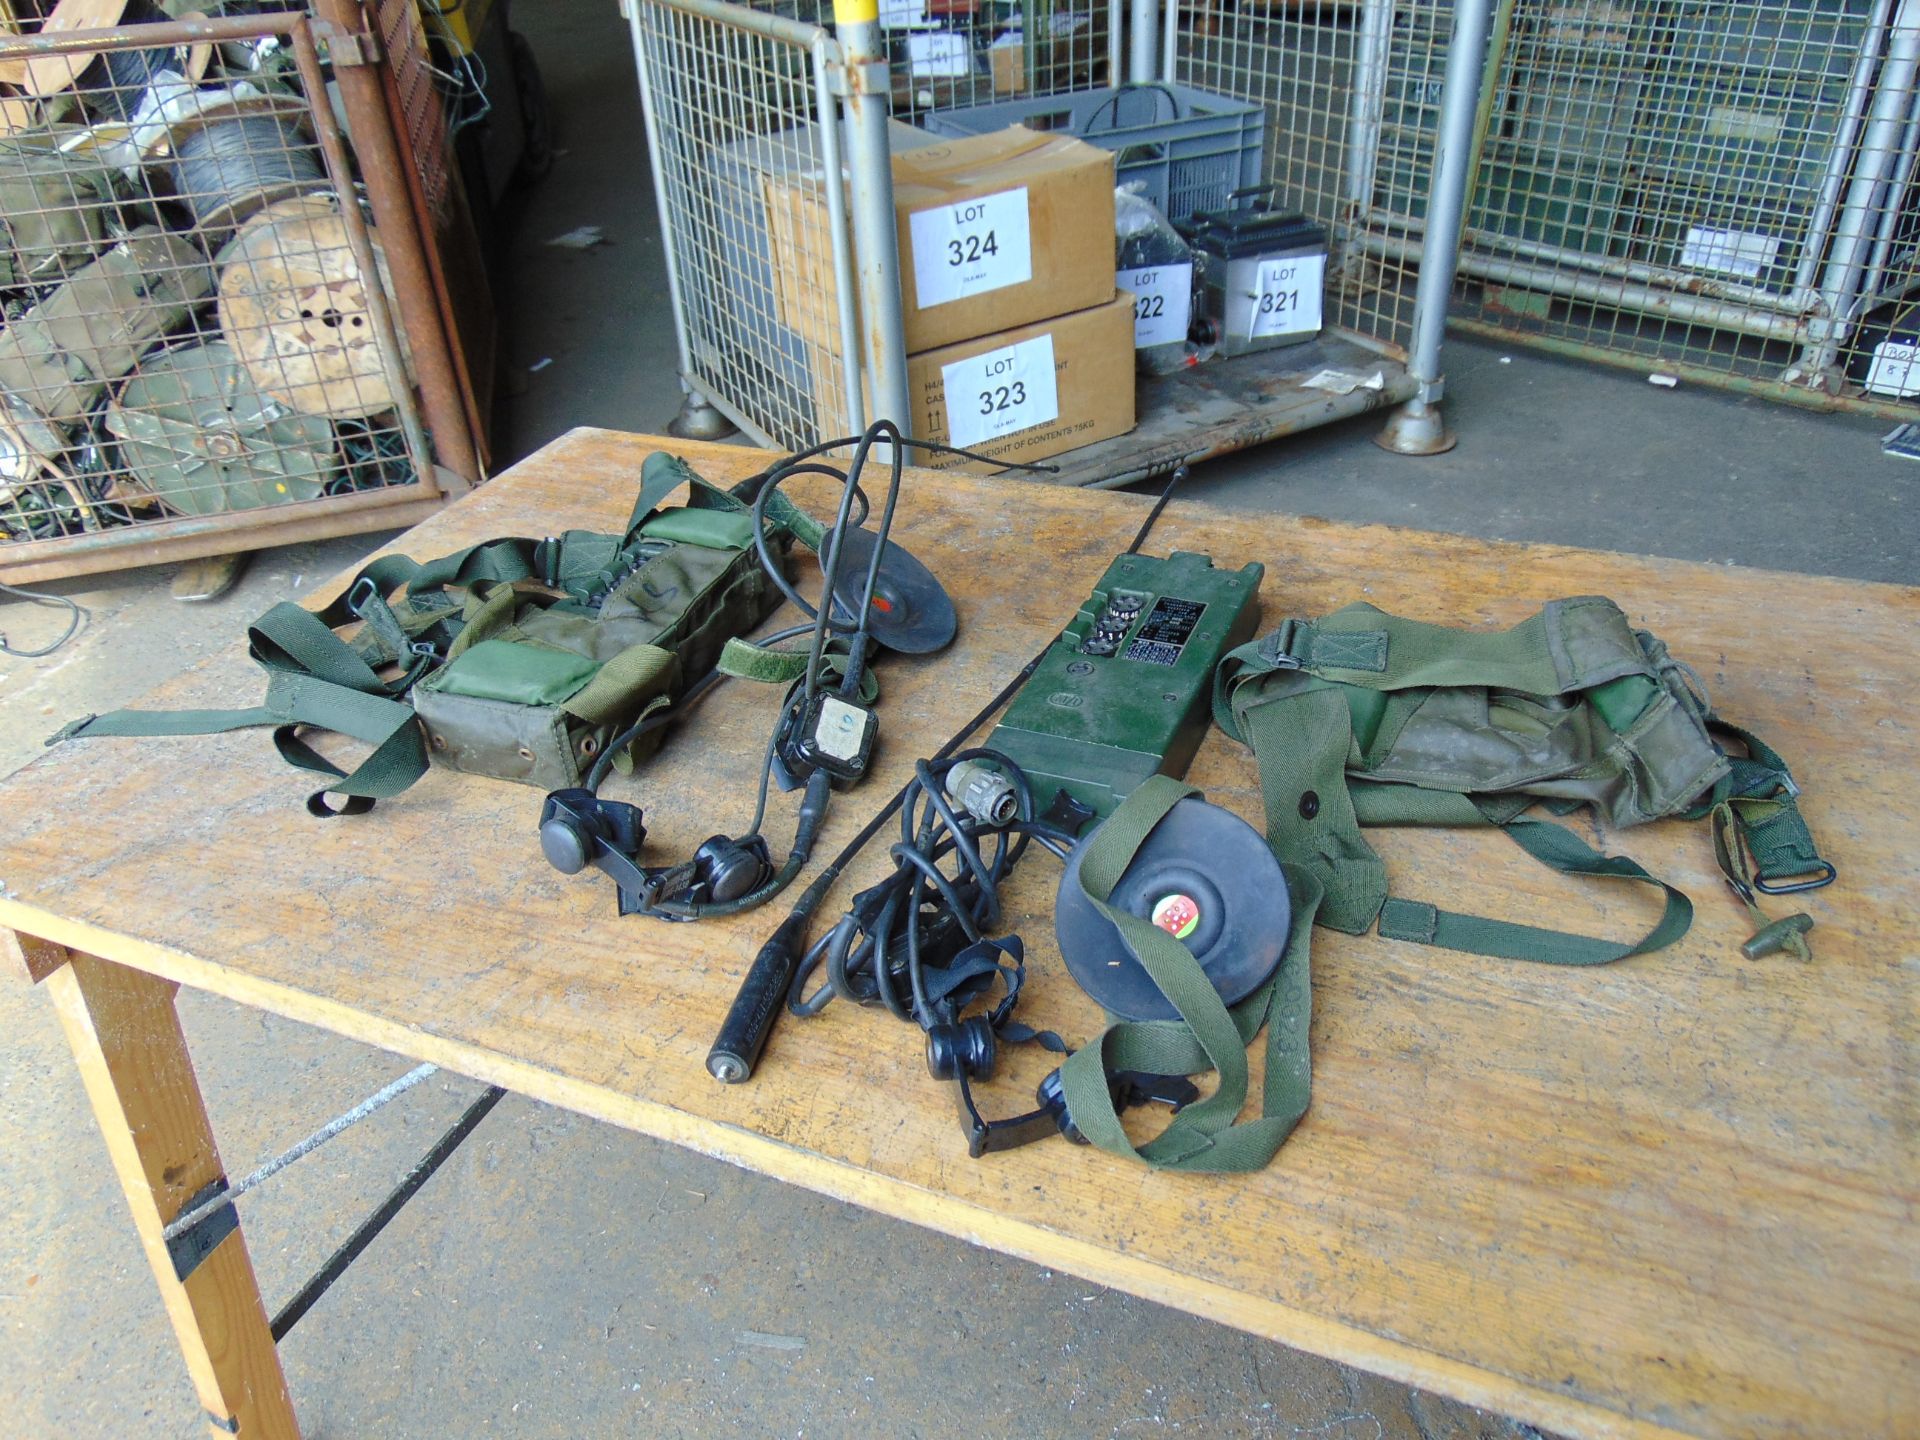 2 x RT 349 British Army Transmitter / Receiver c/w Pouch, Headset, Antenna and Battery Cassette - Image 3 of 5